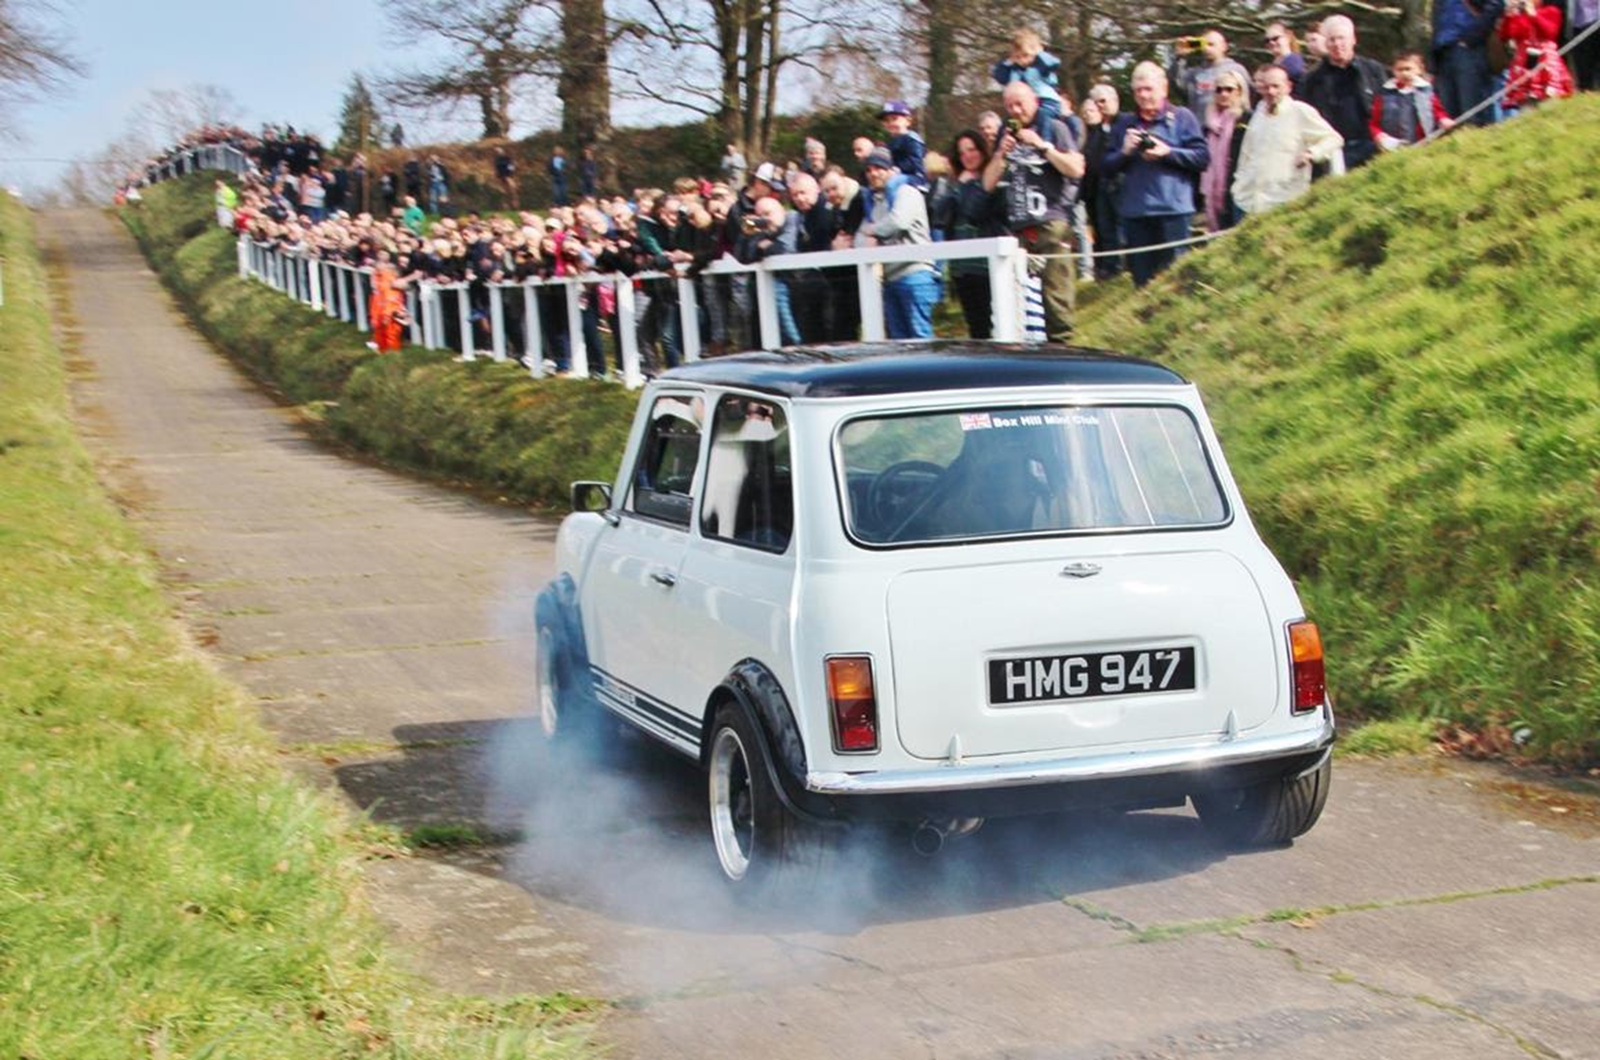 Minis mass for Brooklands open day